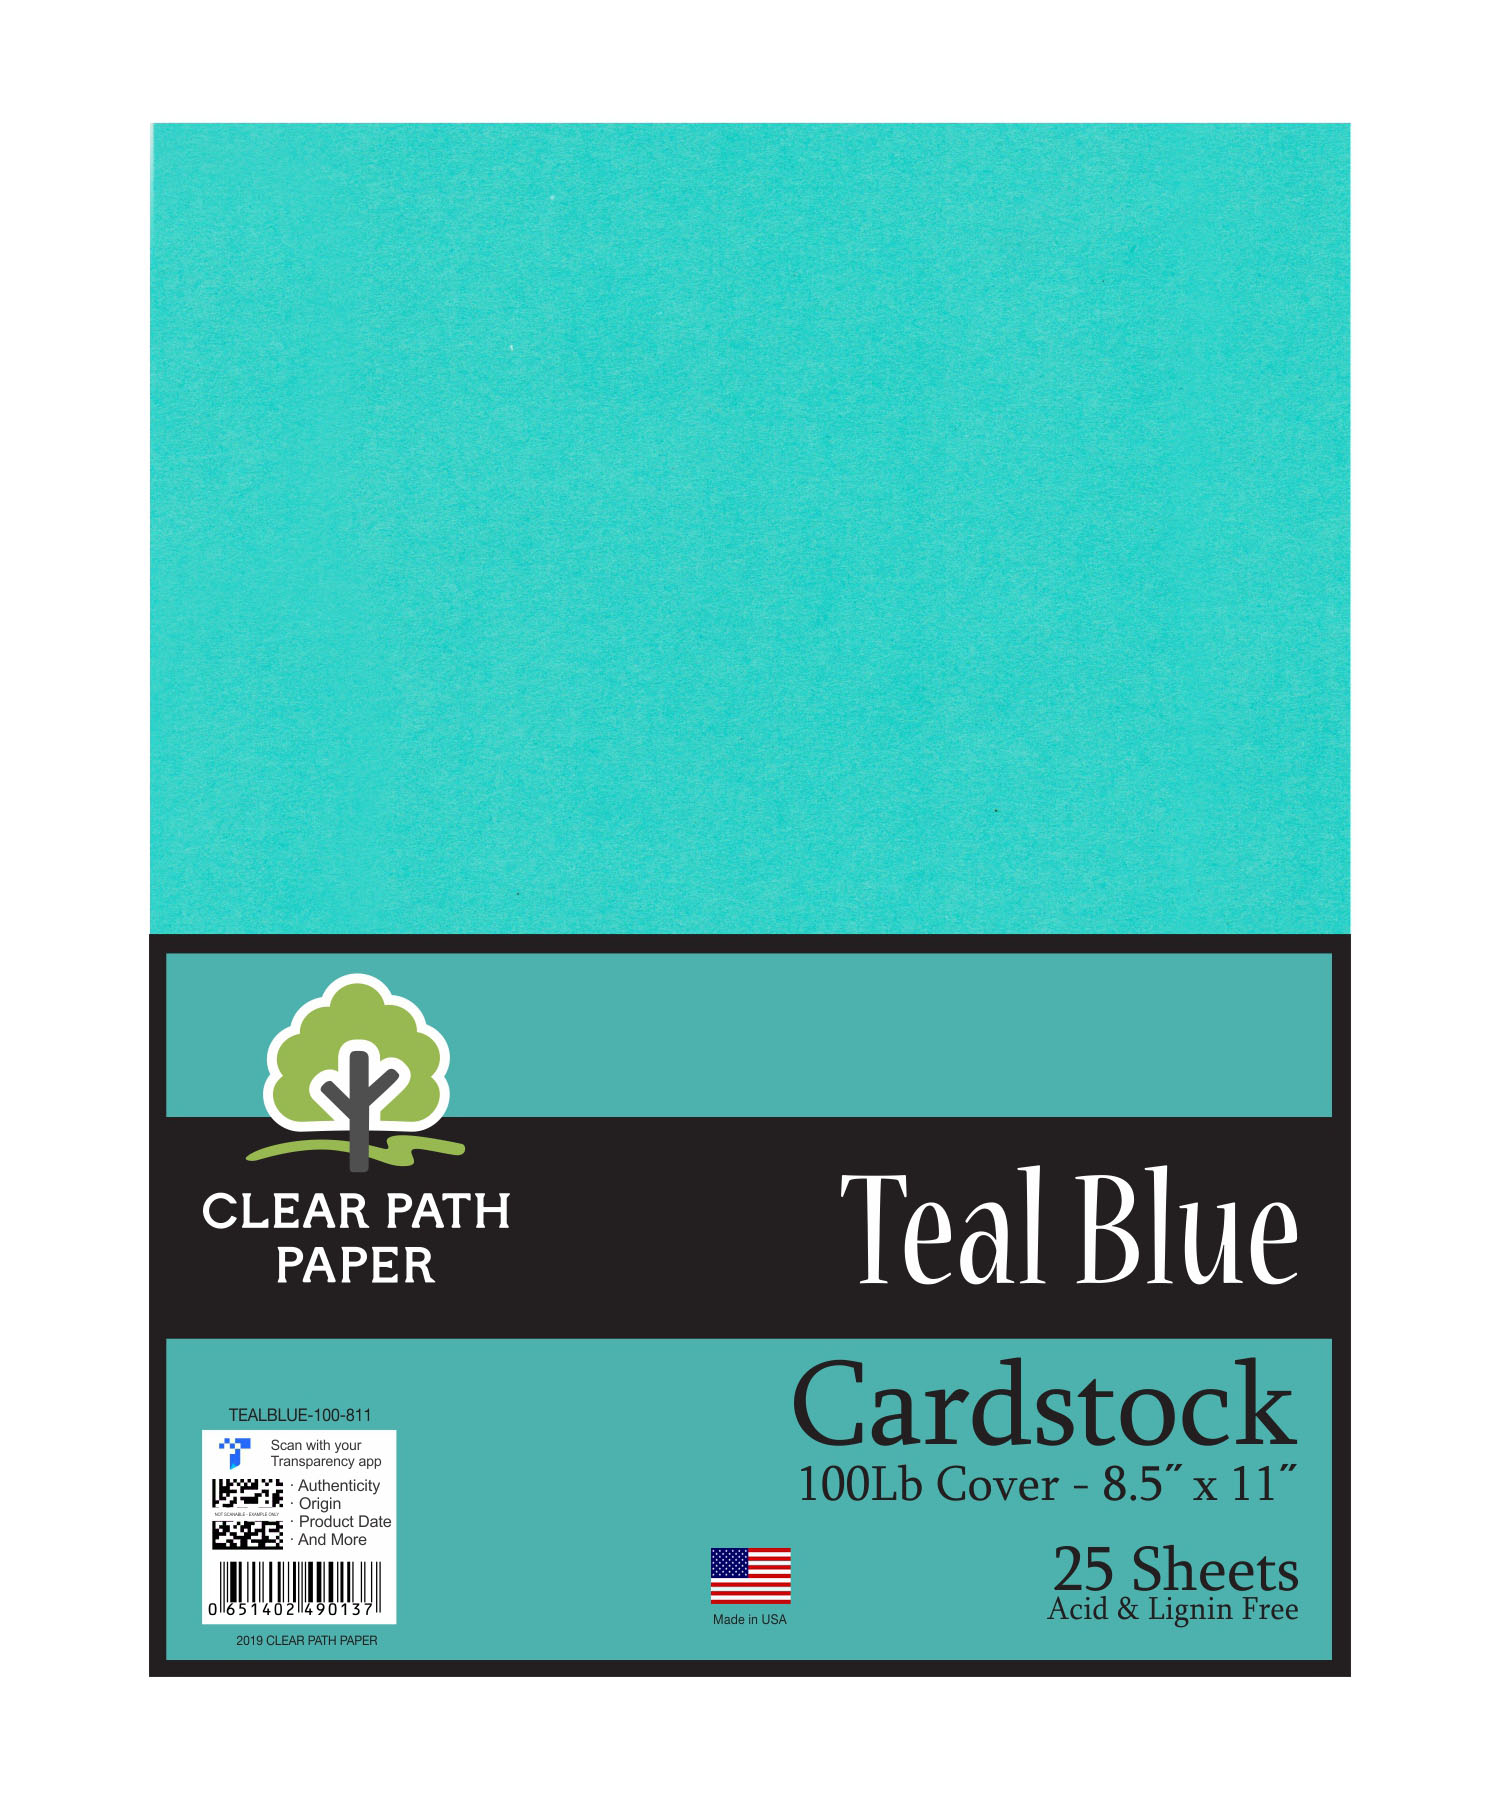 Teal Blue Cardstock - 8.5 x 11 inch - 100Lb Cover 